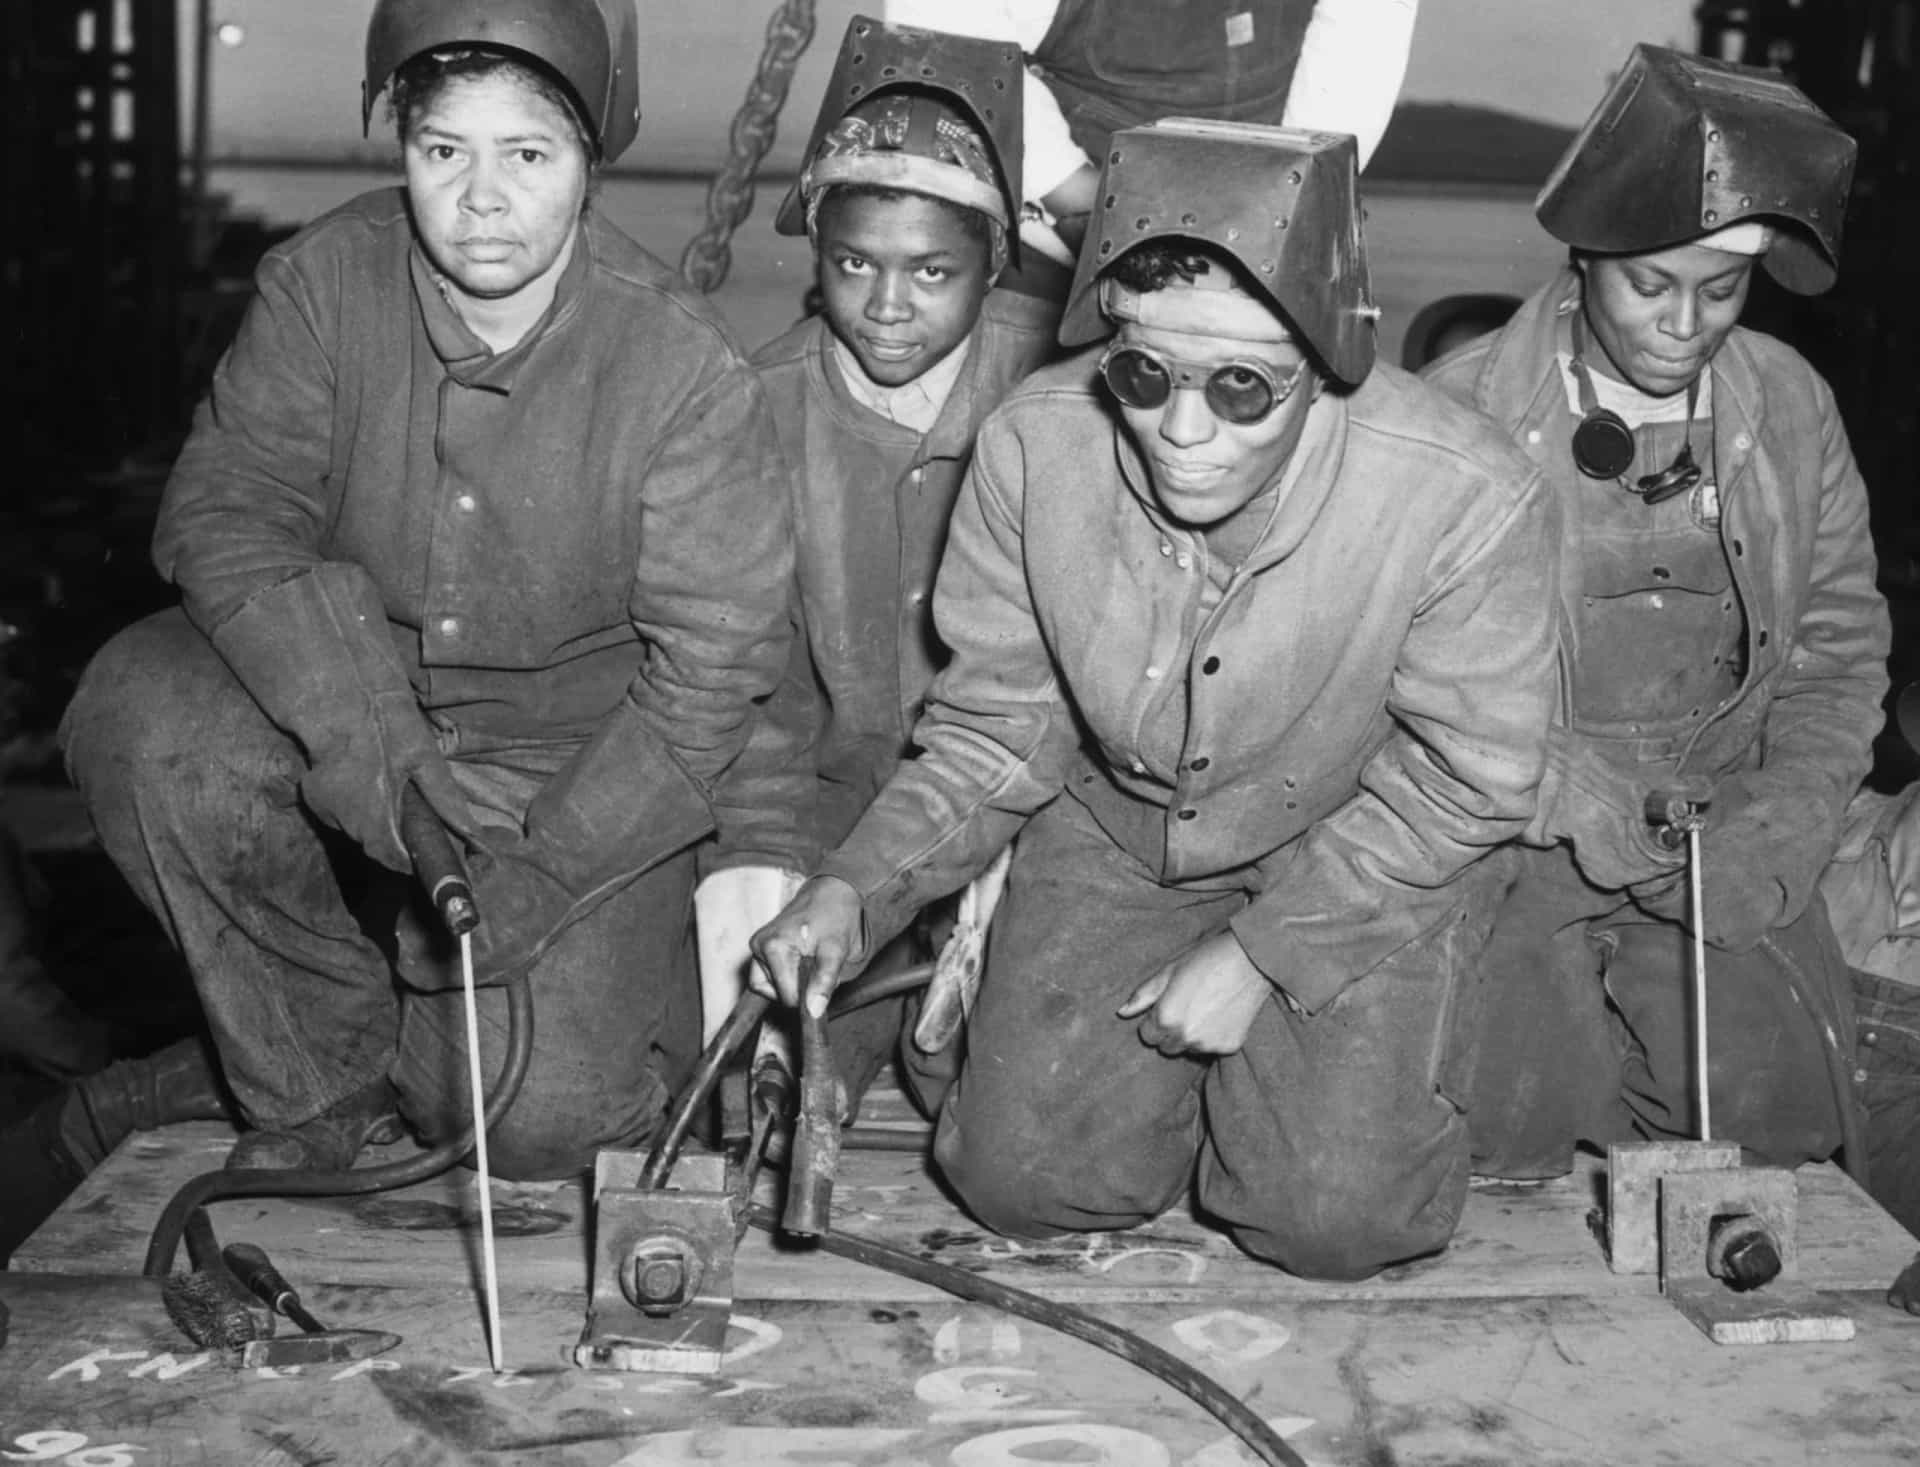 <p>The Second World War saw a great reduction in racial tension between American blacks and whites. Race discrimination was prohibited by law in the defense industry, and many African Americans worked side-by-side with whites in defense jobs. Pictured: African American women welders prepare to work on SS <em>George Washington Carver</em> docked at Richmond, California.</p><p><a href="https://www.msn.com/en-us/community/channel/vid-7xx8mnucu55yw63we9va2gwr7uihbxwc68fxqp25x6tg4ftibpra?cvid=94631541bc0f4f89bfd59158d696ad7e">Follow us and access great exclusive content everyday</a></p>